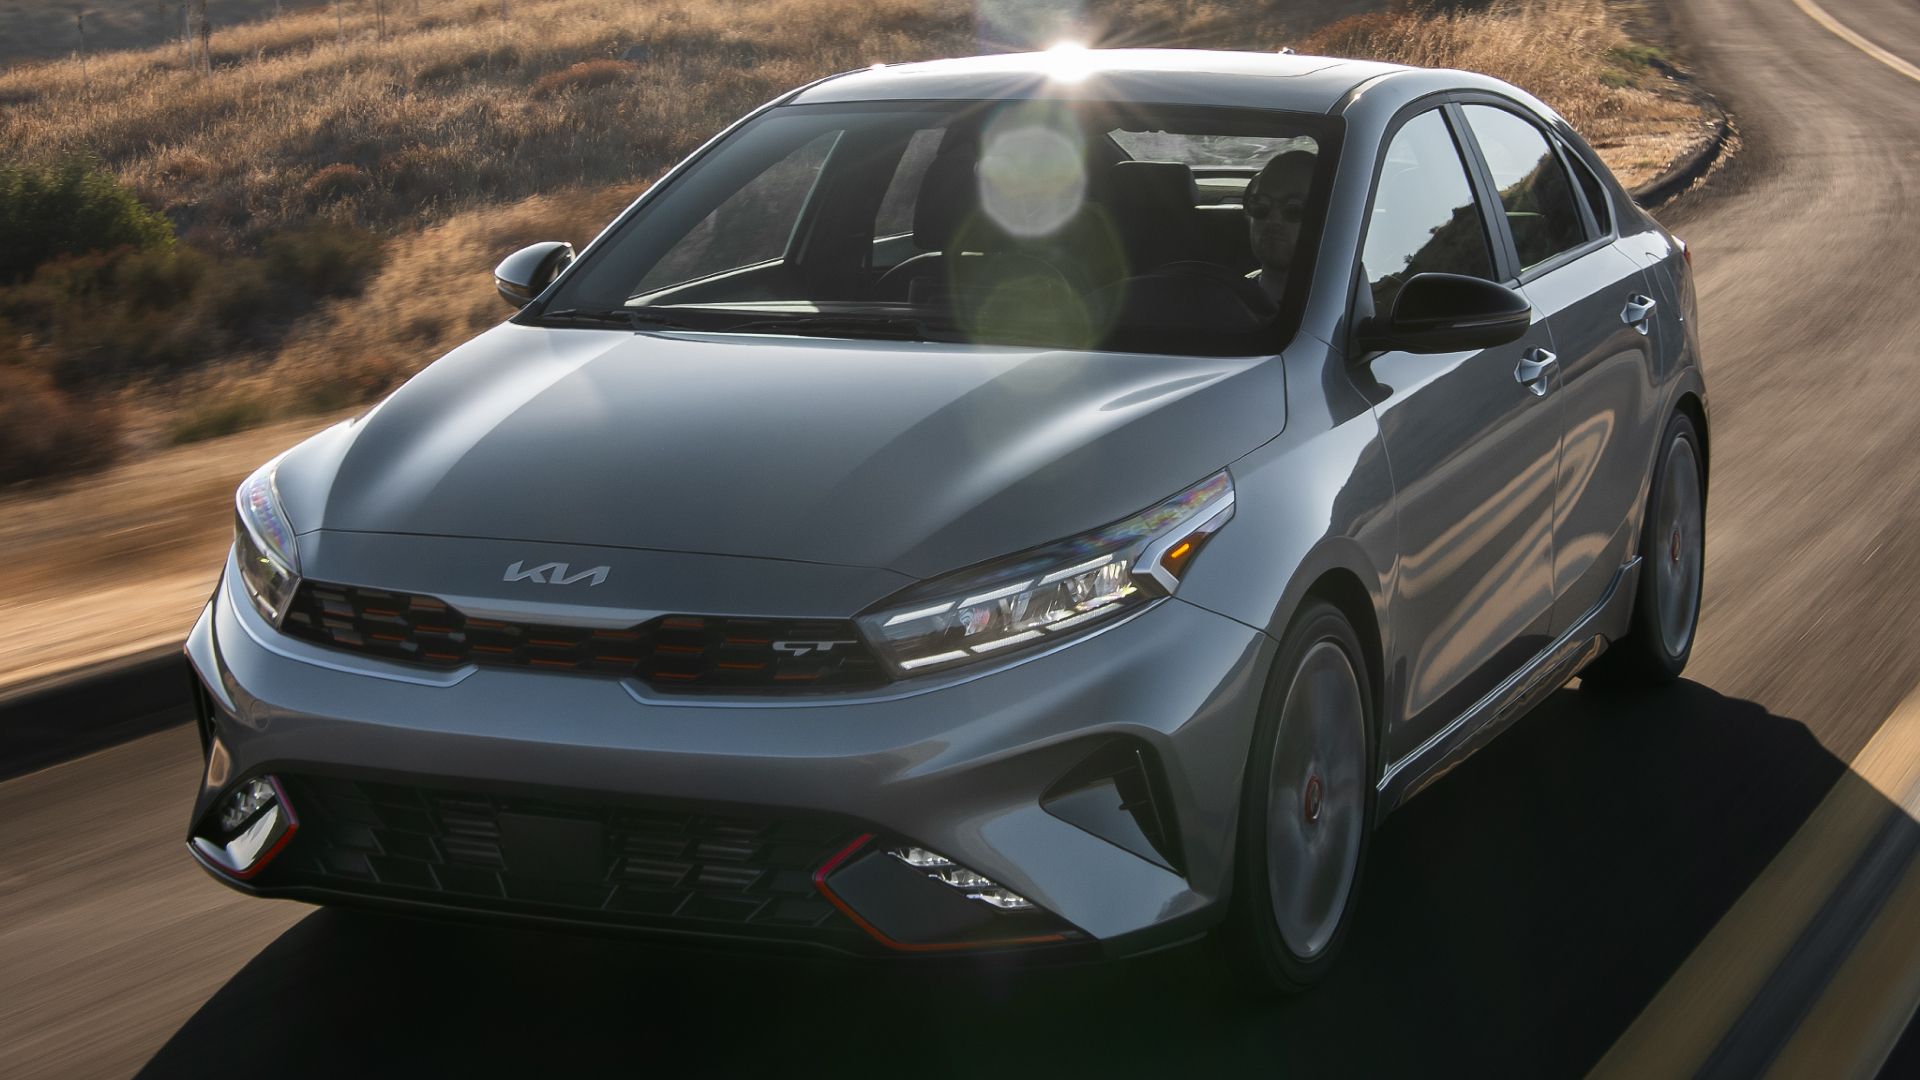 2024 Kia Sedan Lineup Models, Pricing, Features, And Performance